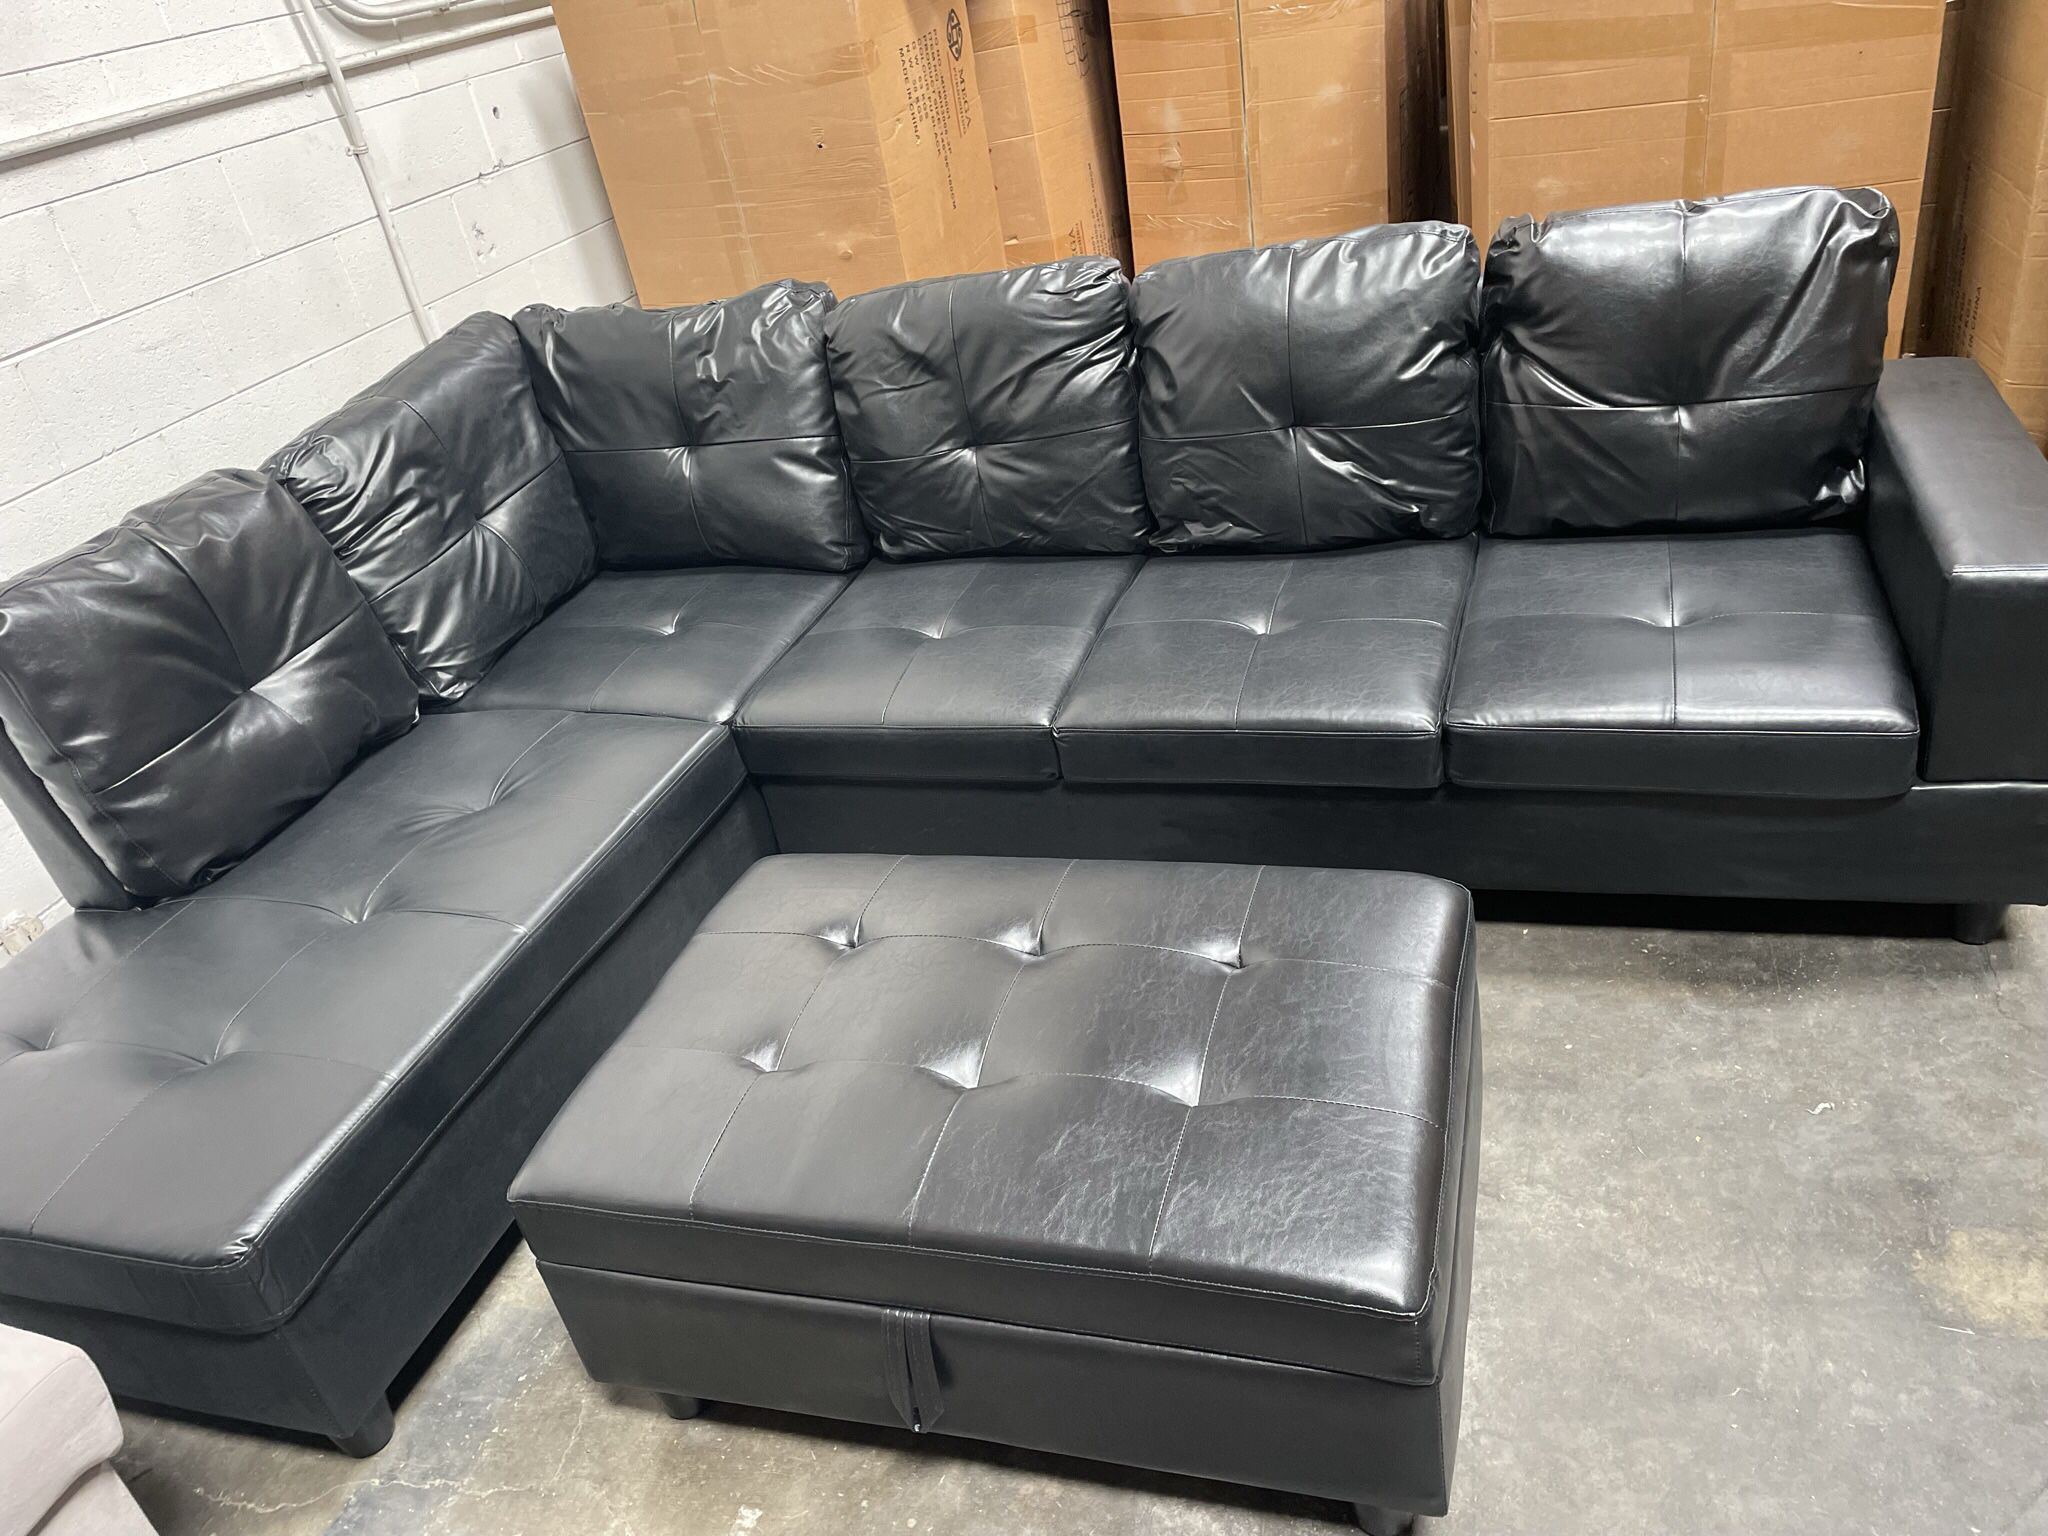 Black Sectional Couch with ottoman 